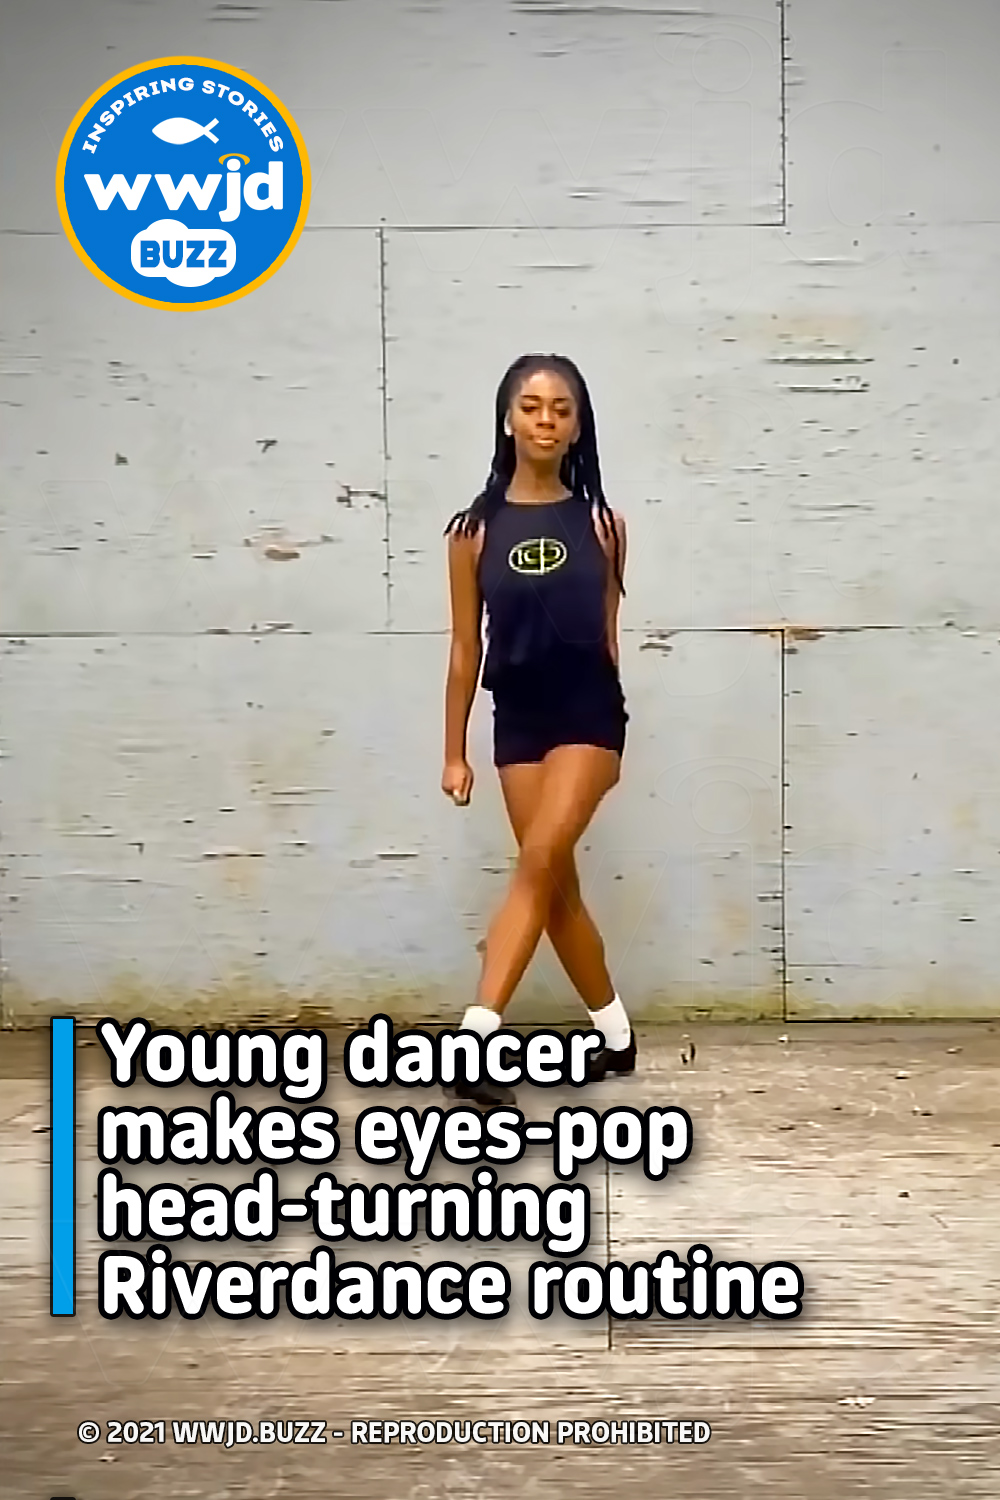 Young dancer makes eyes-pop head-turning Riverdance routine